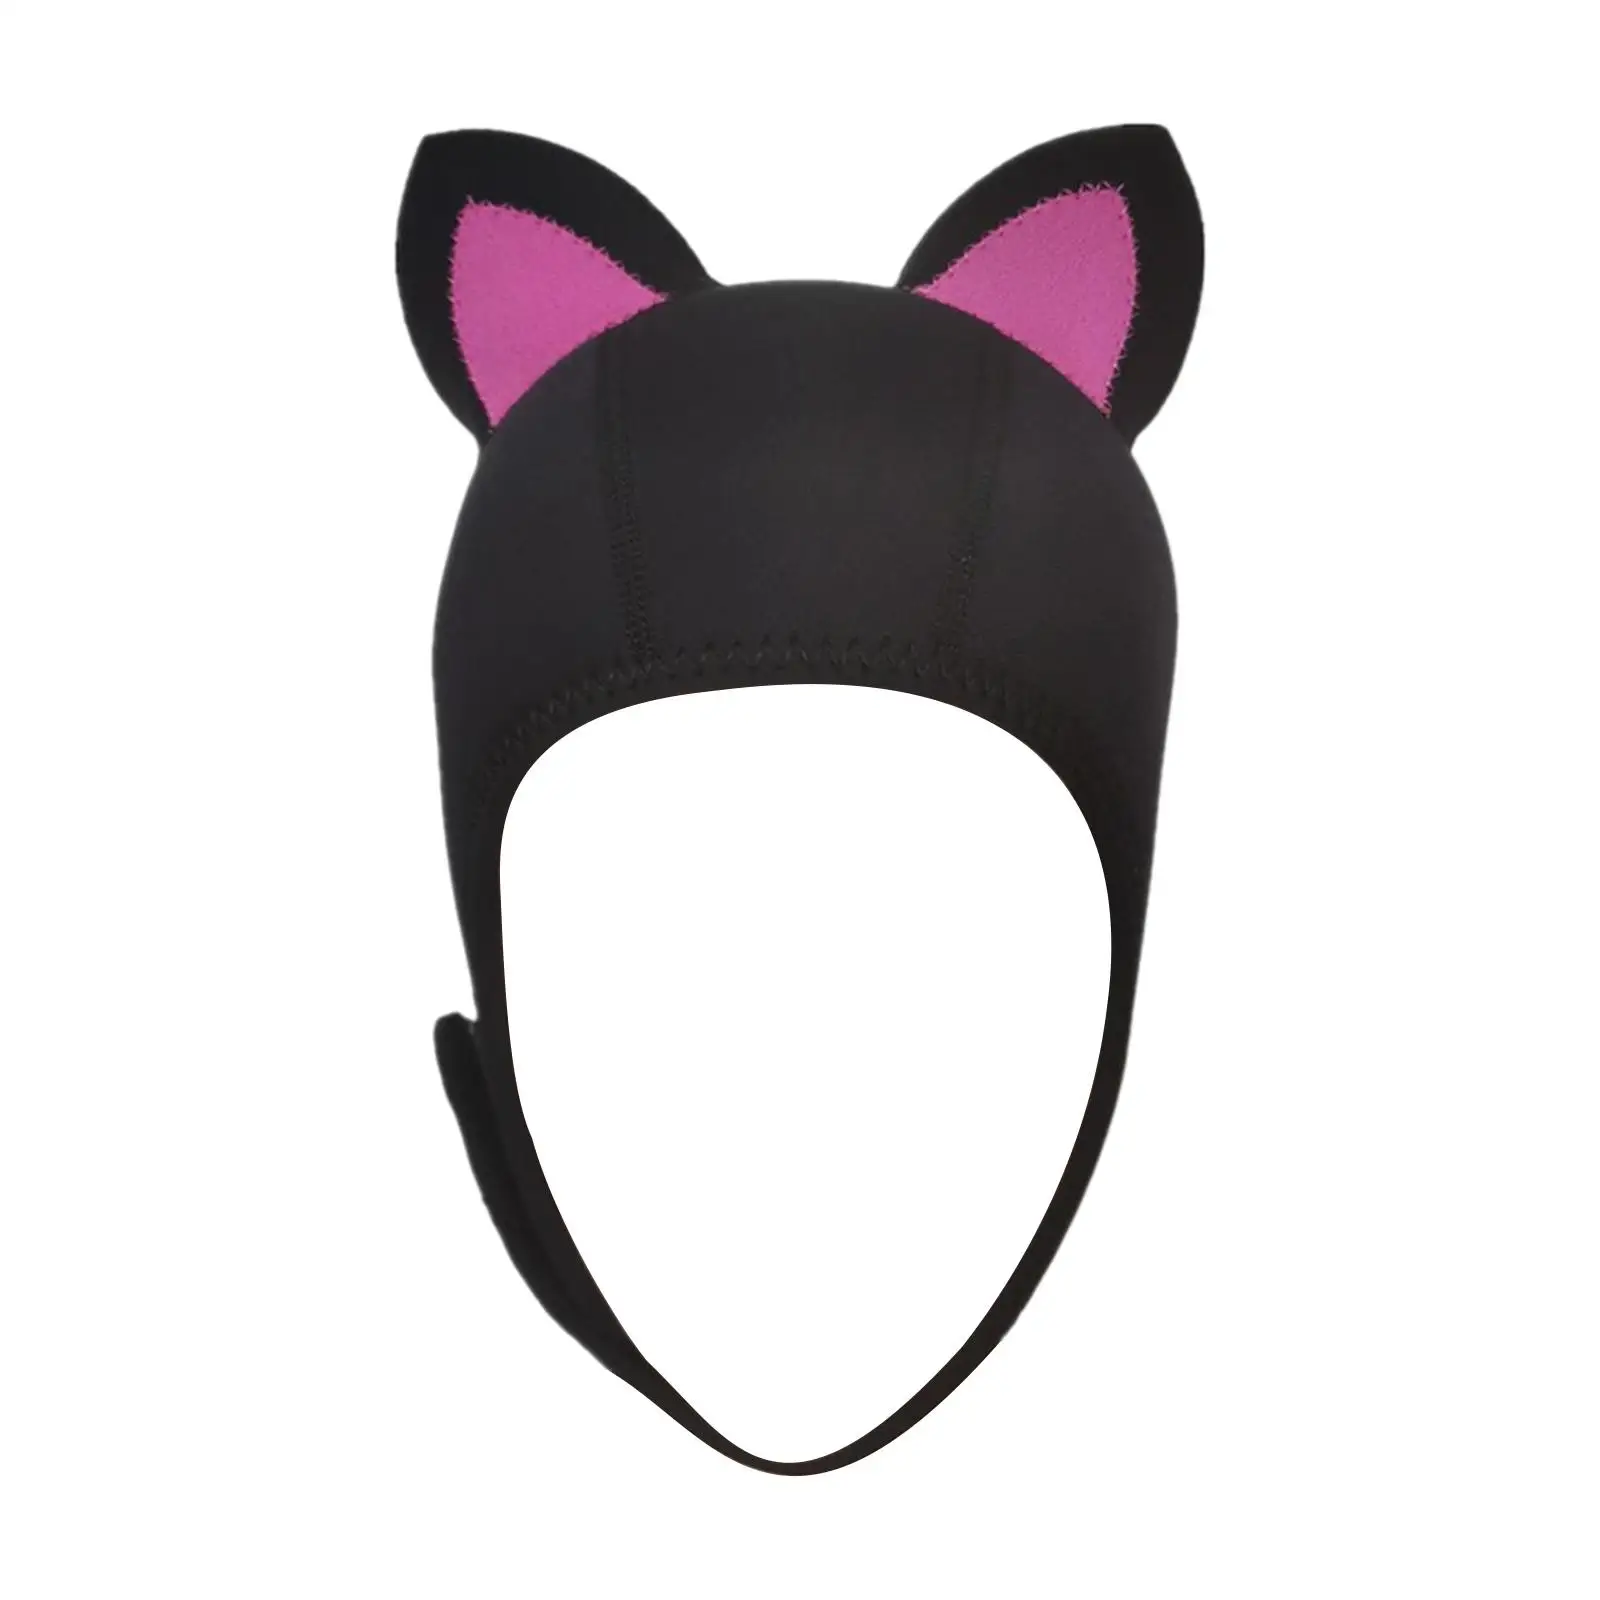 Cat Ears Scuba Diving Hood Hat for Woman Children for Snorkeling Swimming Comfortable Convenient to Wear and Take Off Durable